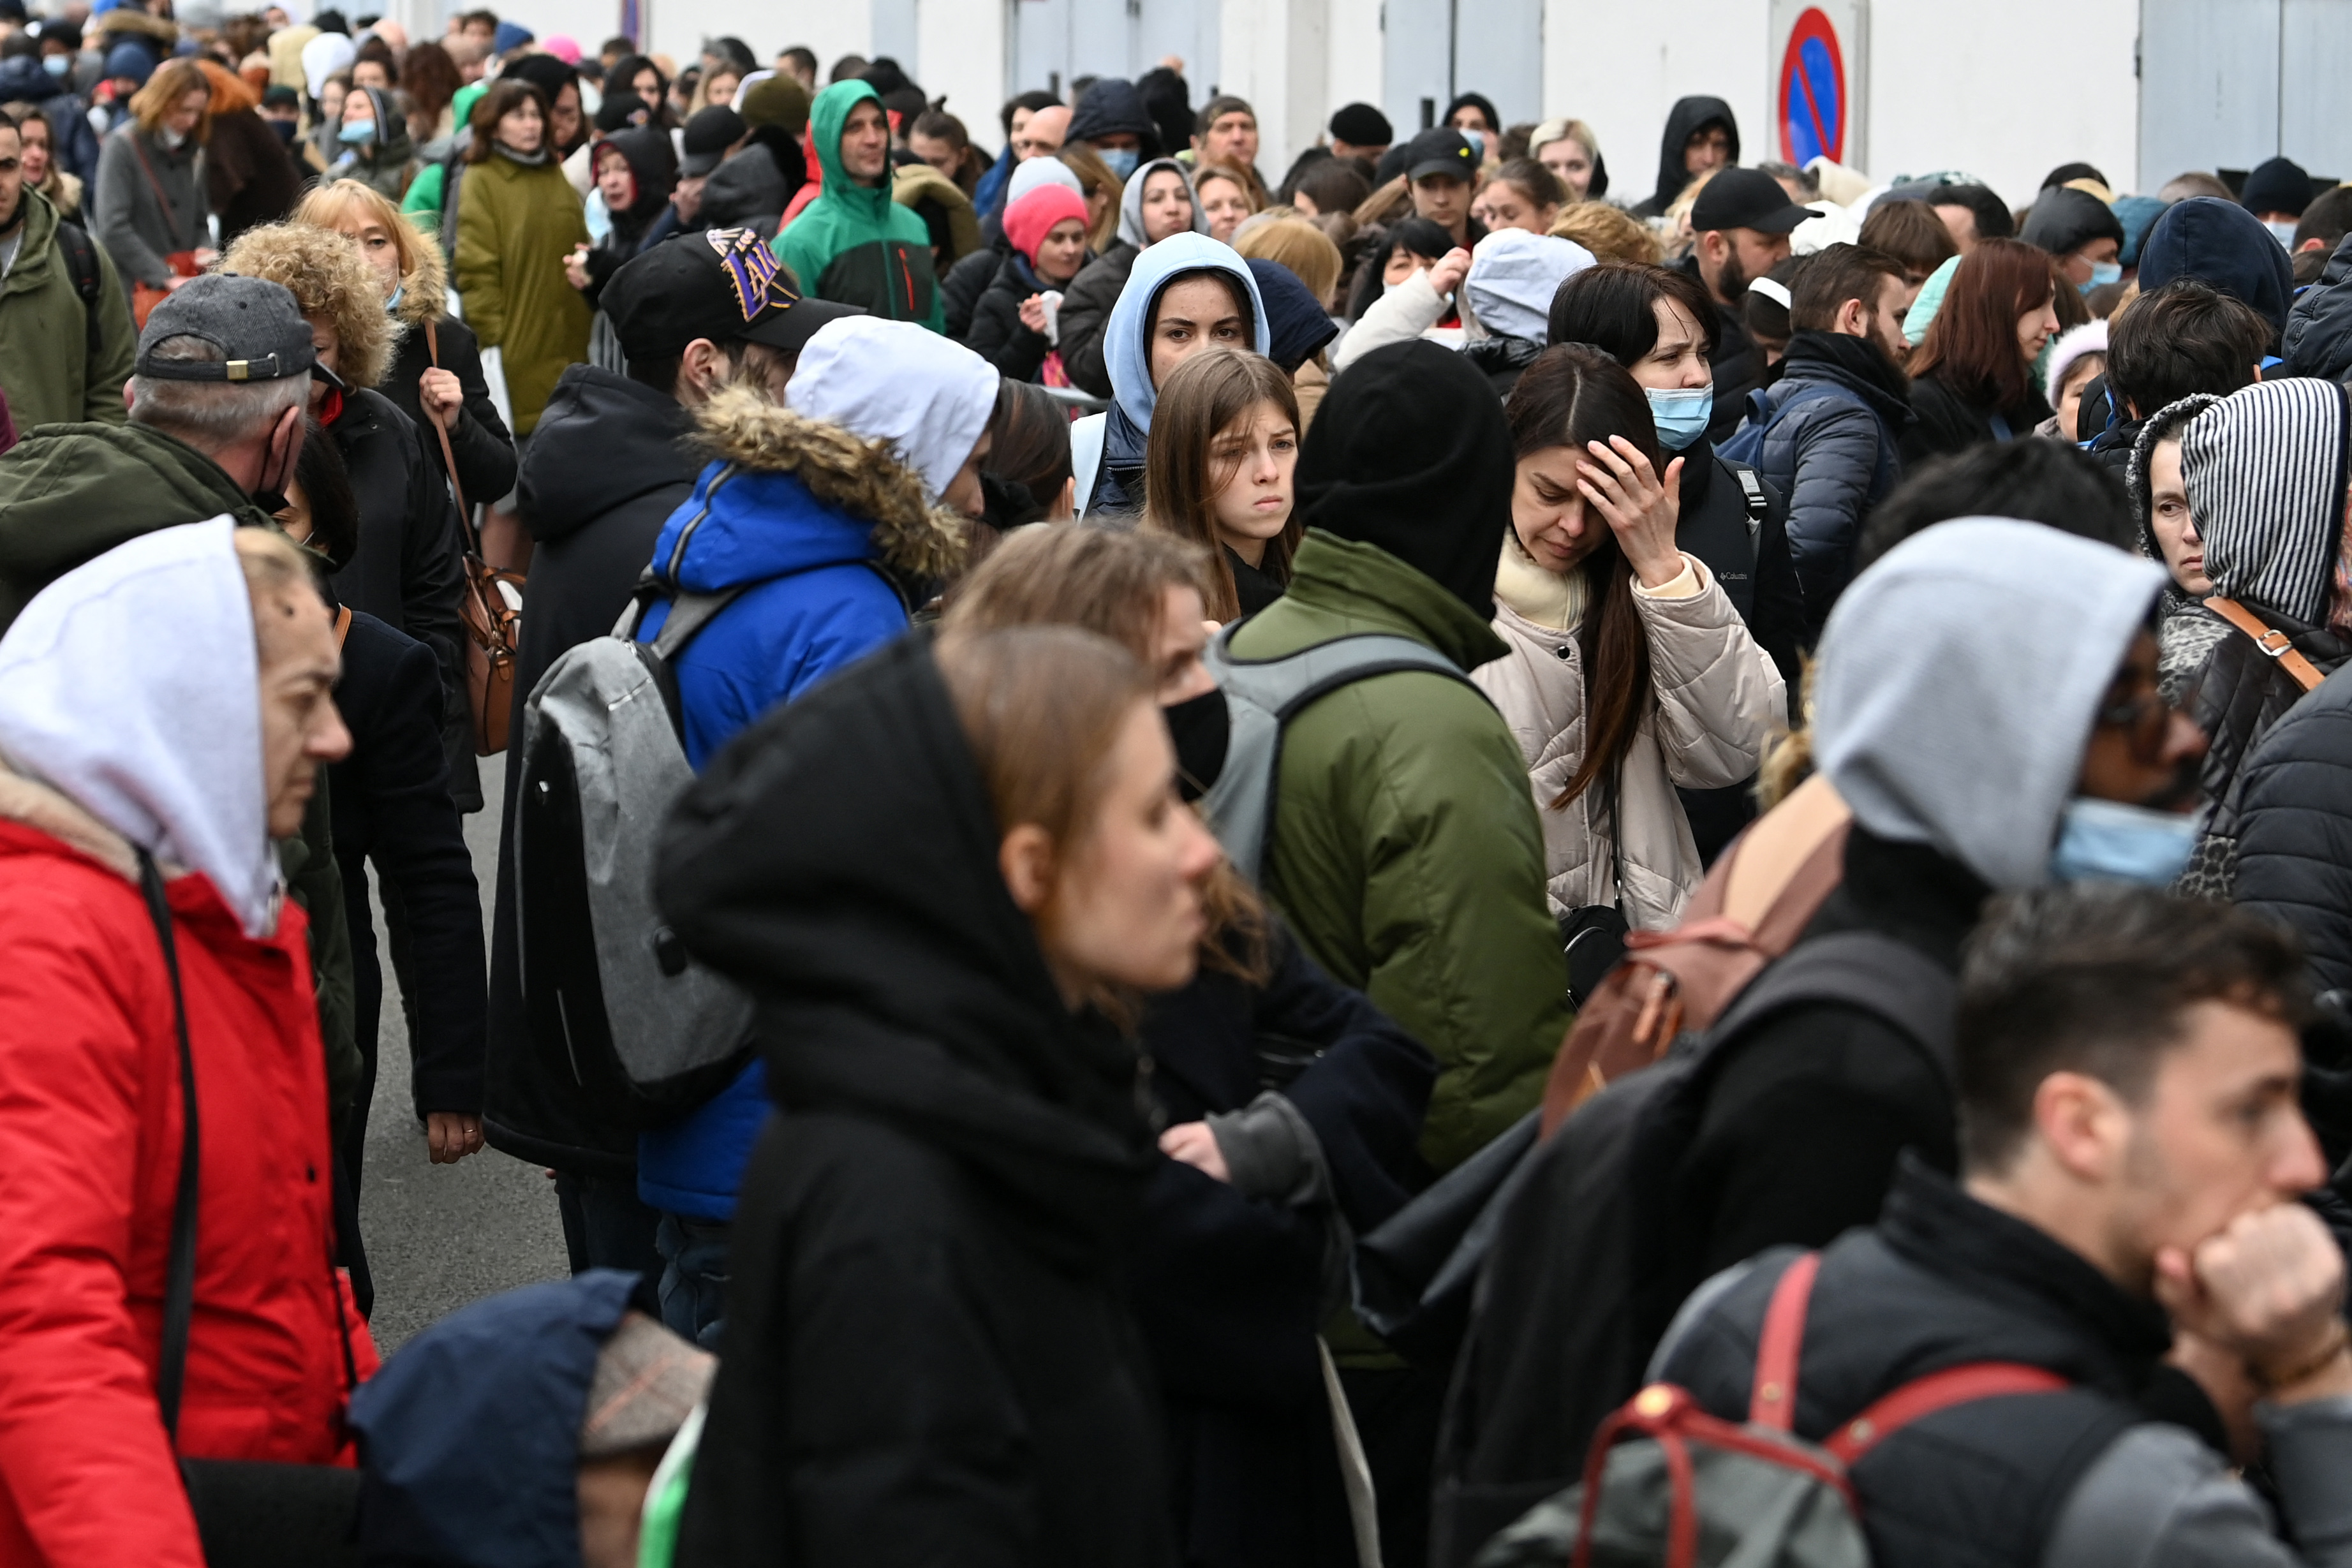 Ukrainians queue outside a refugee welcome center in Paris, France, on March 17.